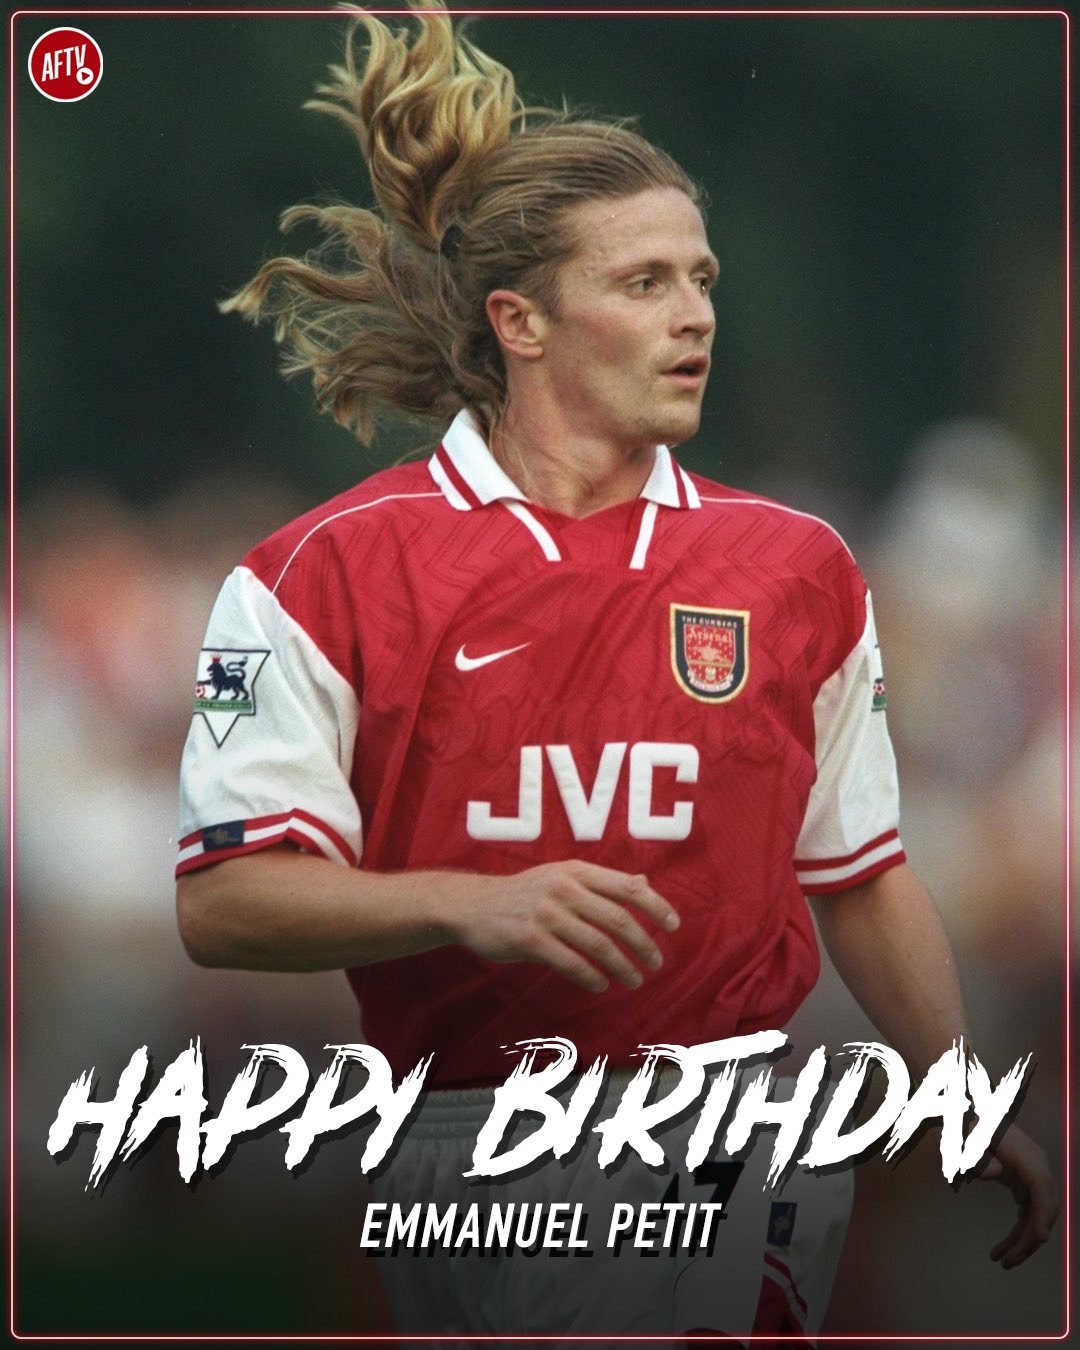 Happy birthday to Emmanuel Petit, who turns 51 today  